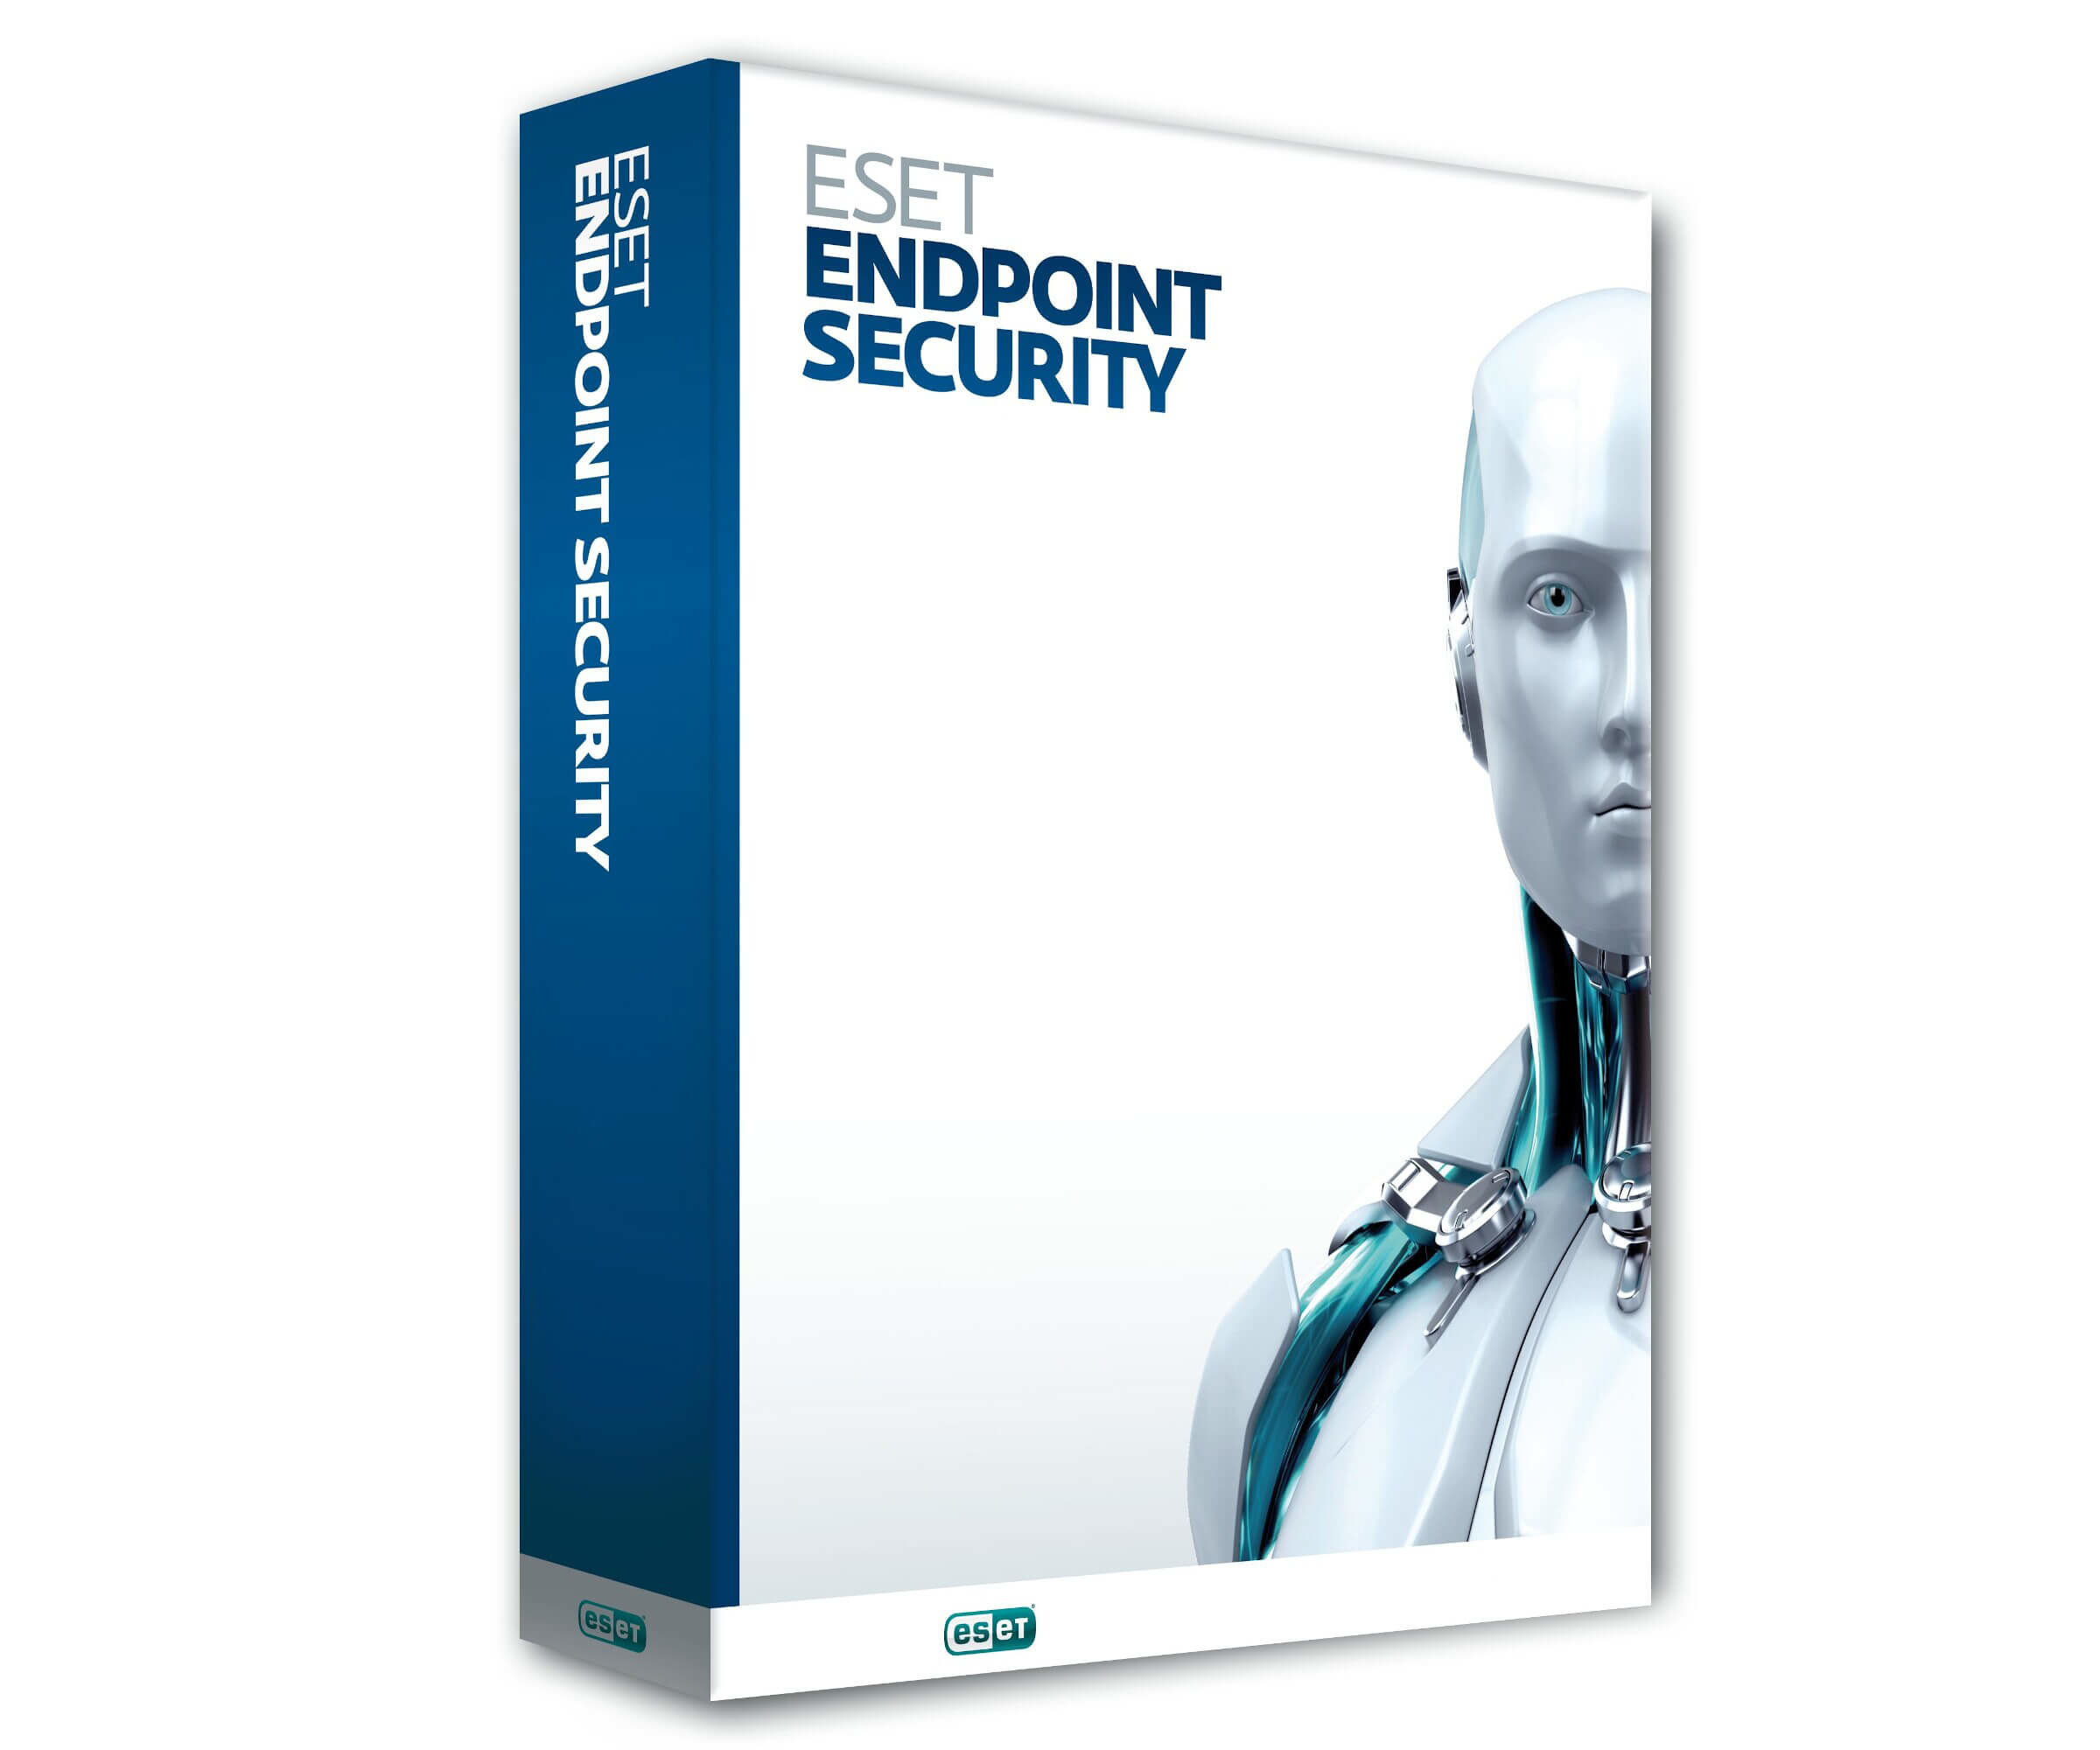 ESET Endpoint Security 10.1.2058.0 instal the new for mac